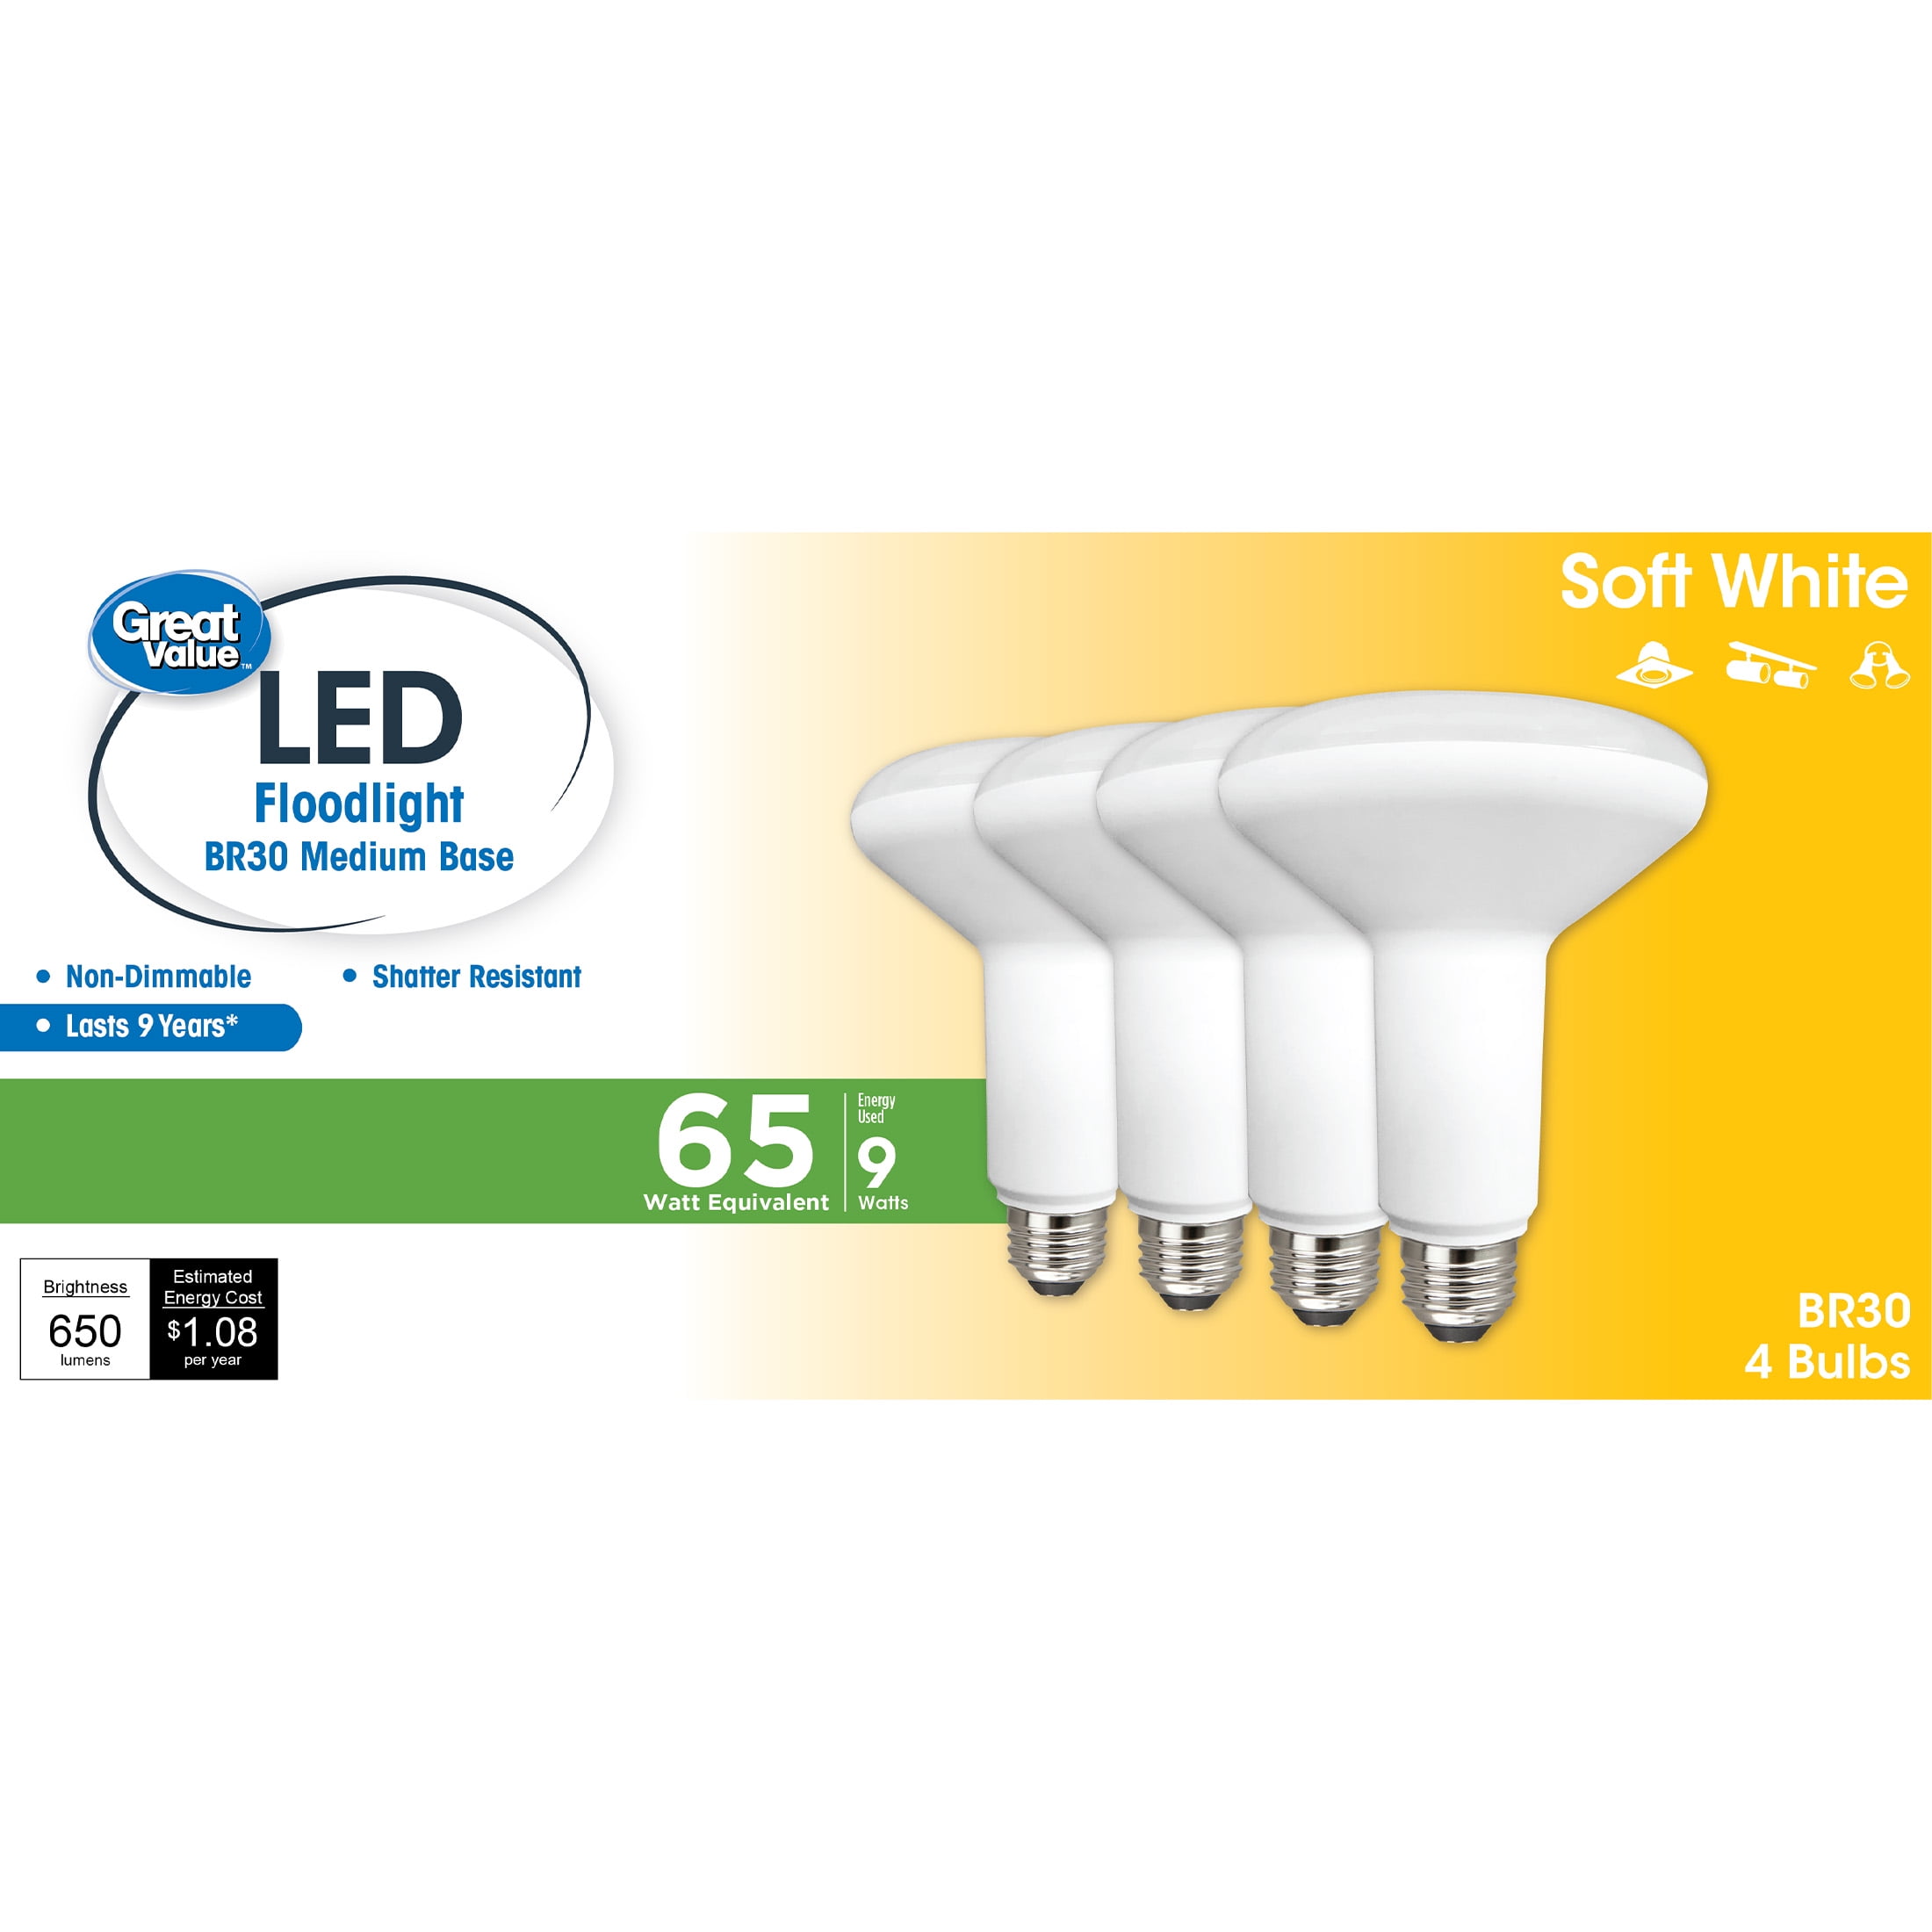 Great Value LED Light Bulb, Watts (65W Equivalent) BR30 Floodlight Lamp  E26 Medium Base, Non-dimmable, Soft White, 4-Pack